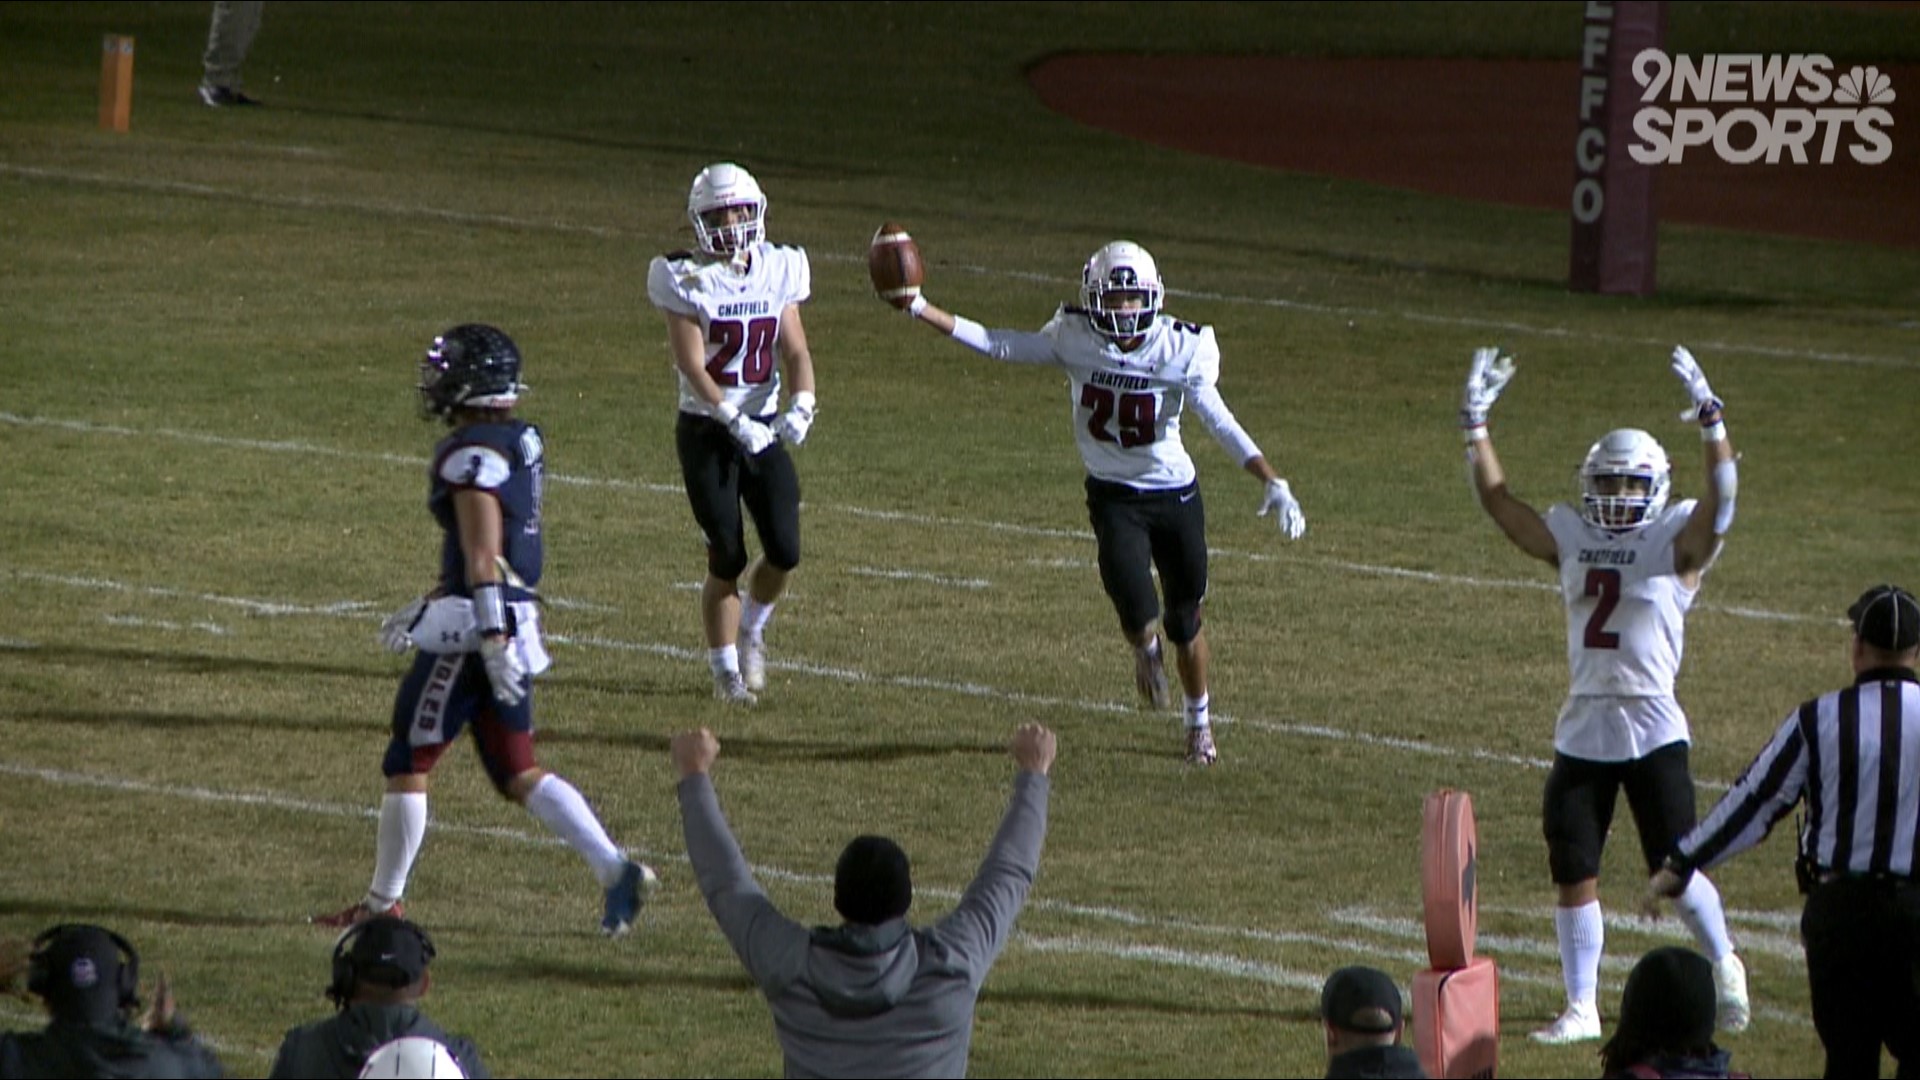 The Chargers pulled off the 42-31 upset over the undefeated Eagles in Friday night's 4A quarterfinals.